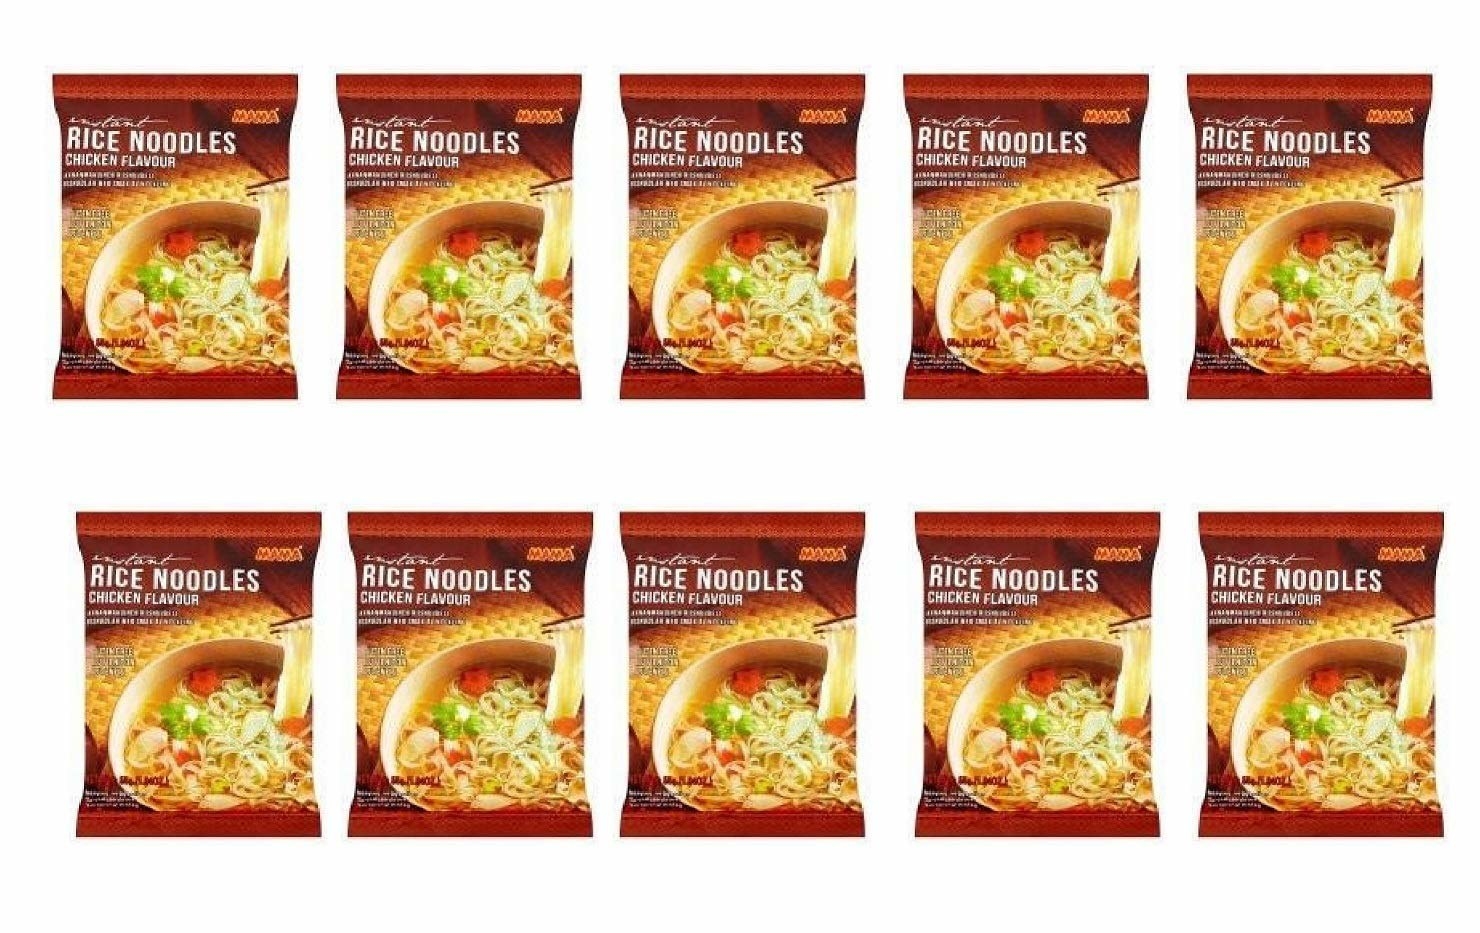 Packaging of the noodles